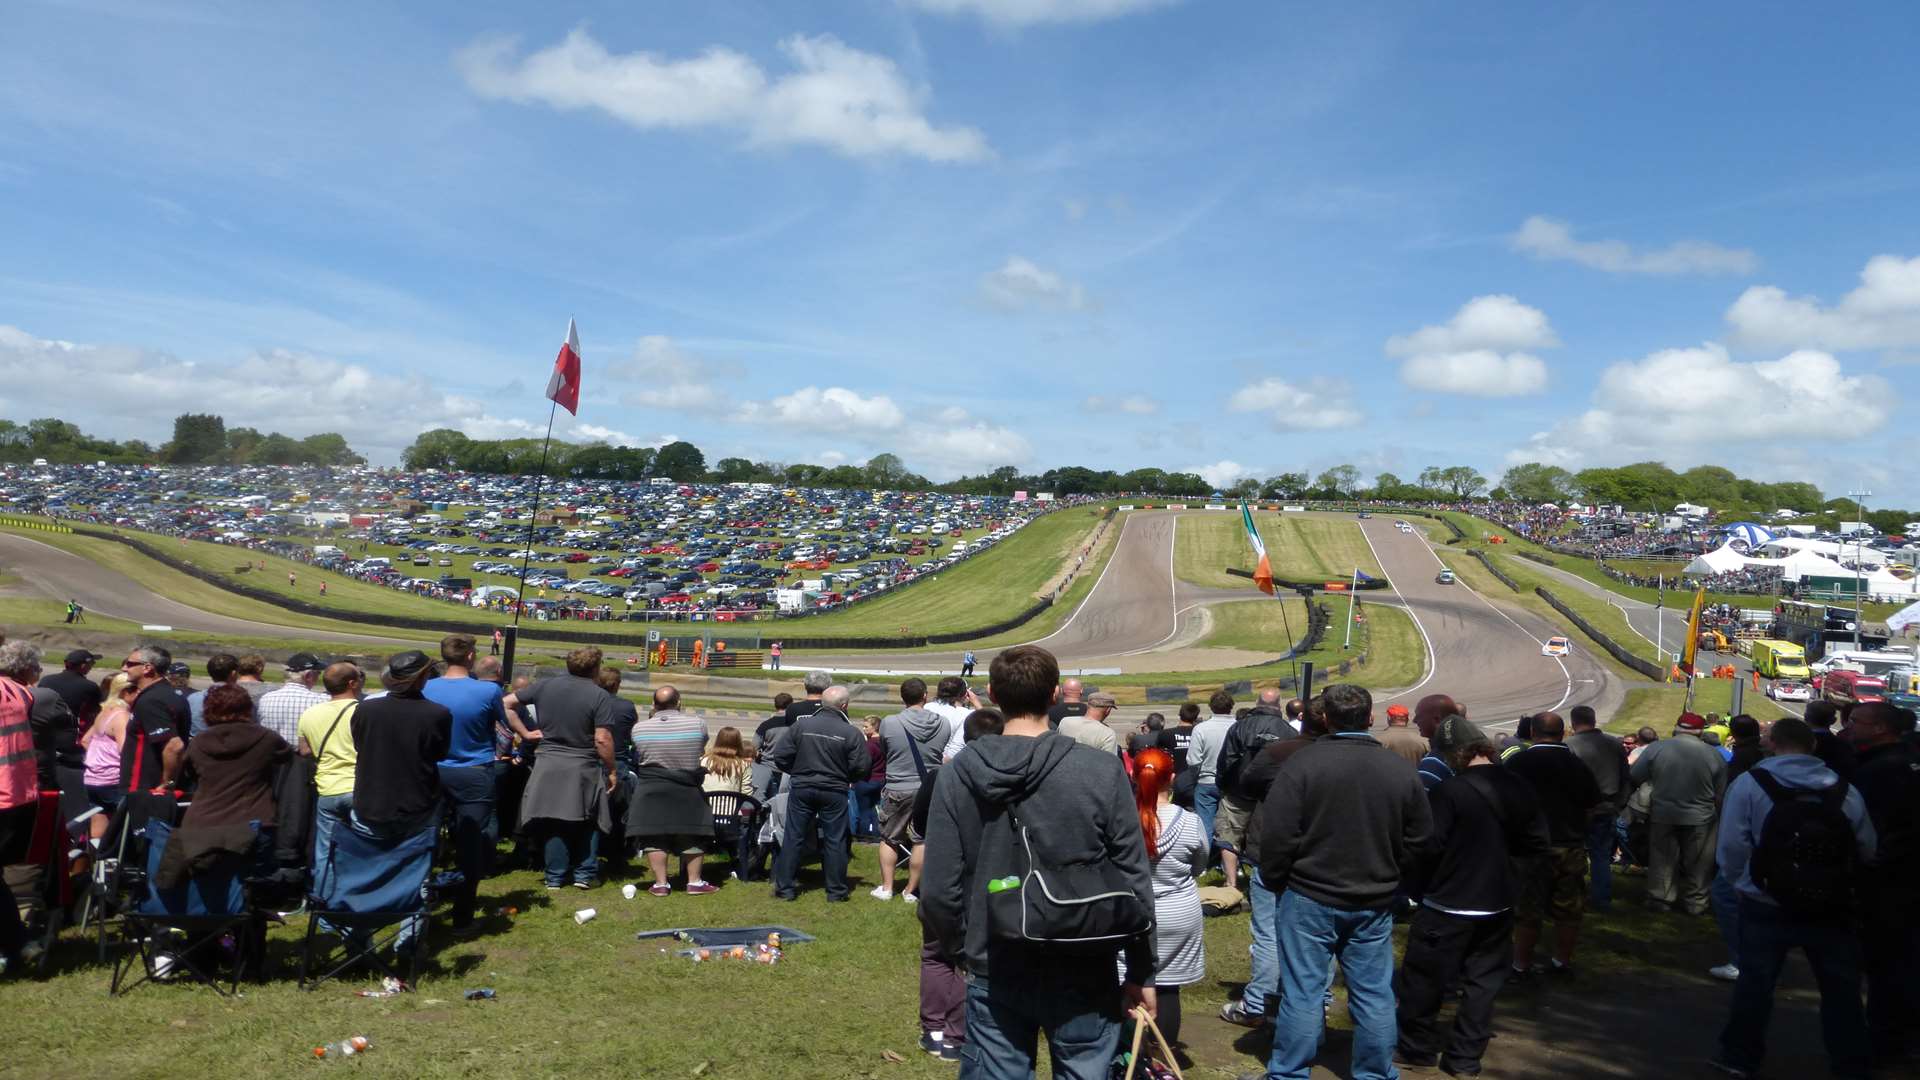 Last year's Lydden event attracted 10,000 spectators. Picture: Joe Wright